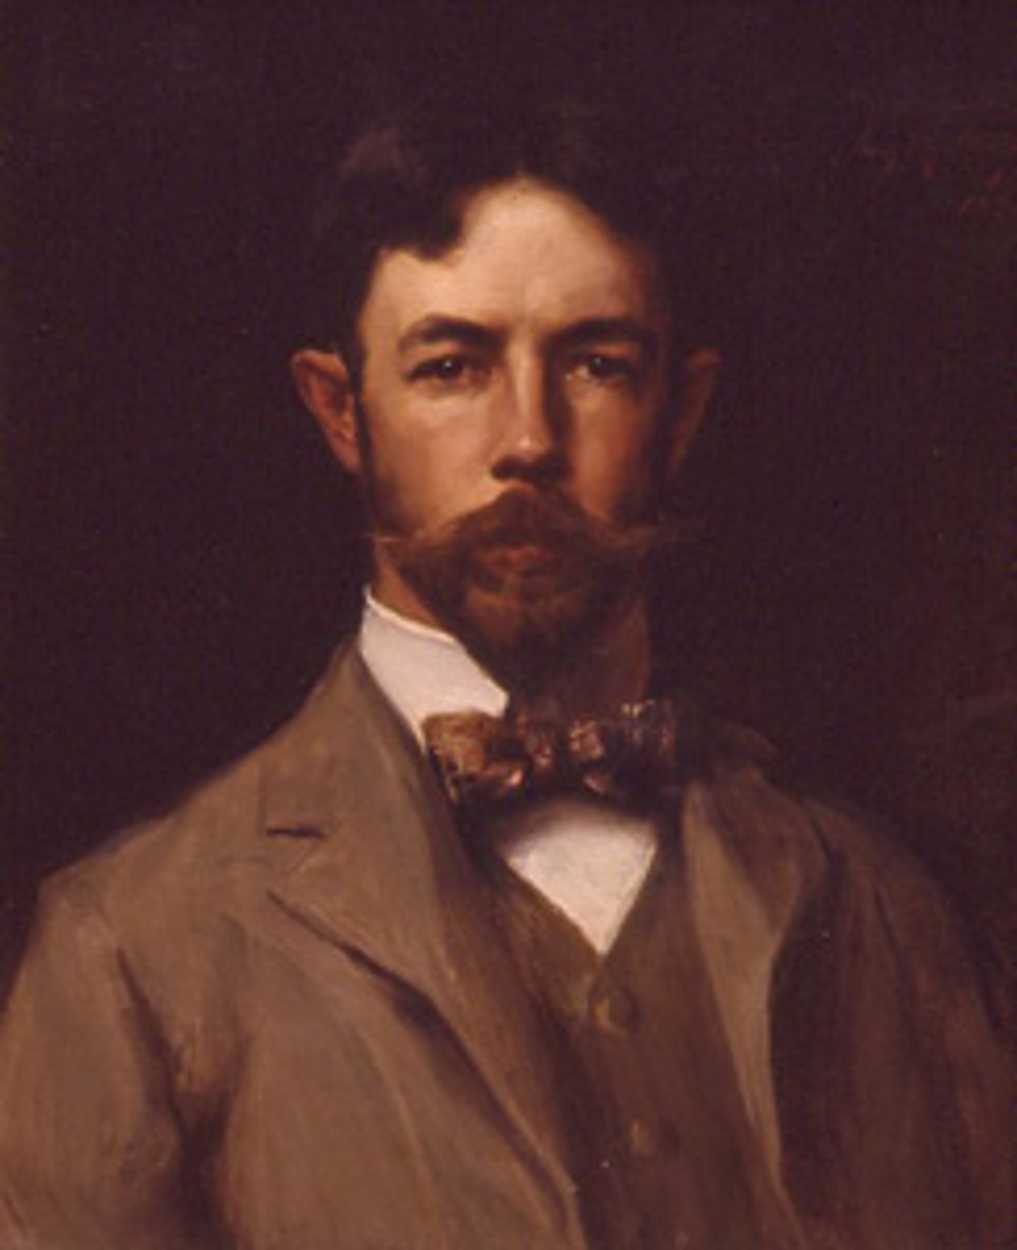 Irving Ramsey Wiles - April 8, 1861 - July 29, 1948